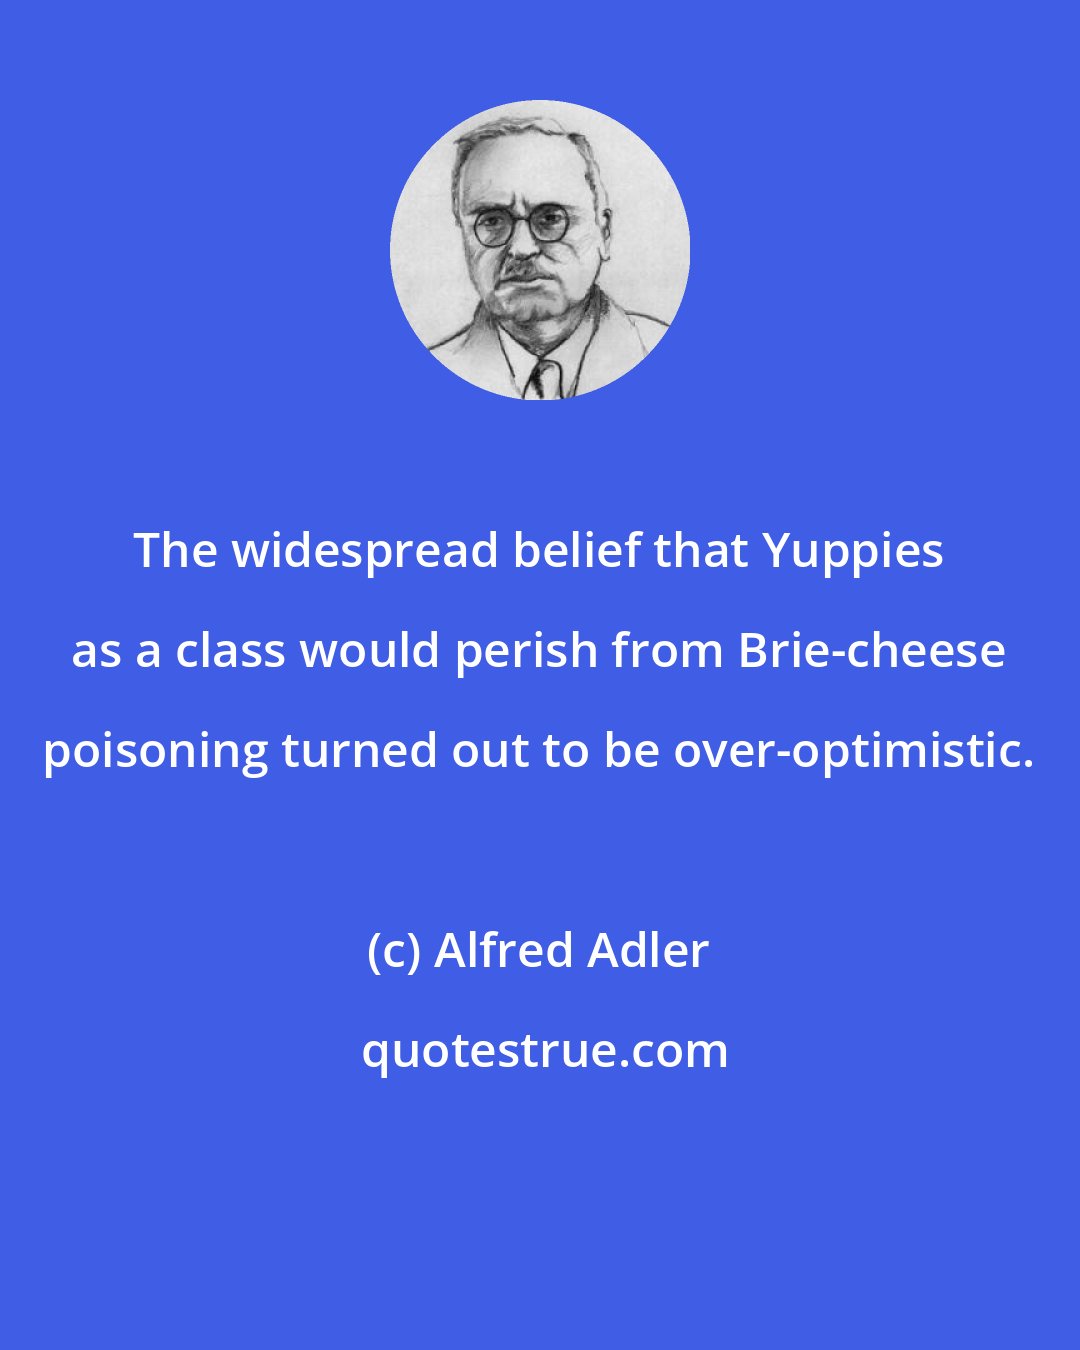 Alfred Adler: The widespread belief that Yuppies as a class would perish from Brie-cheese poisoning turned out to be over-optimistic.